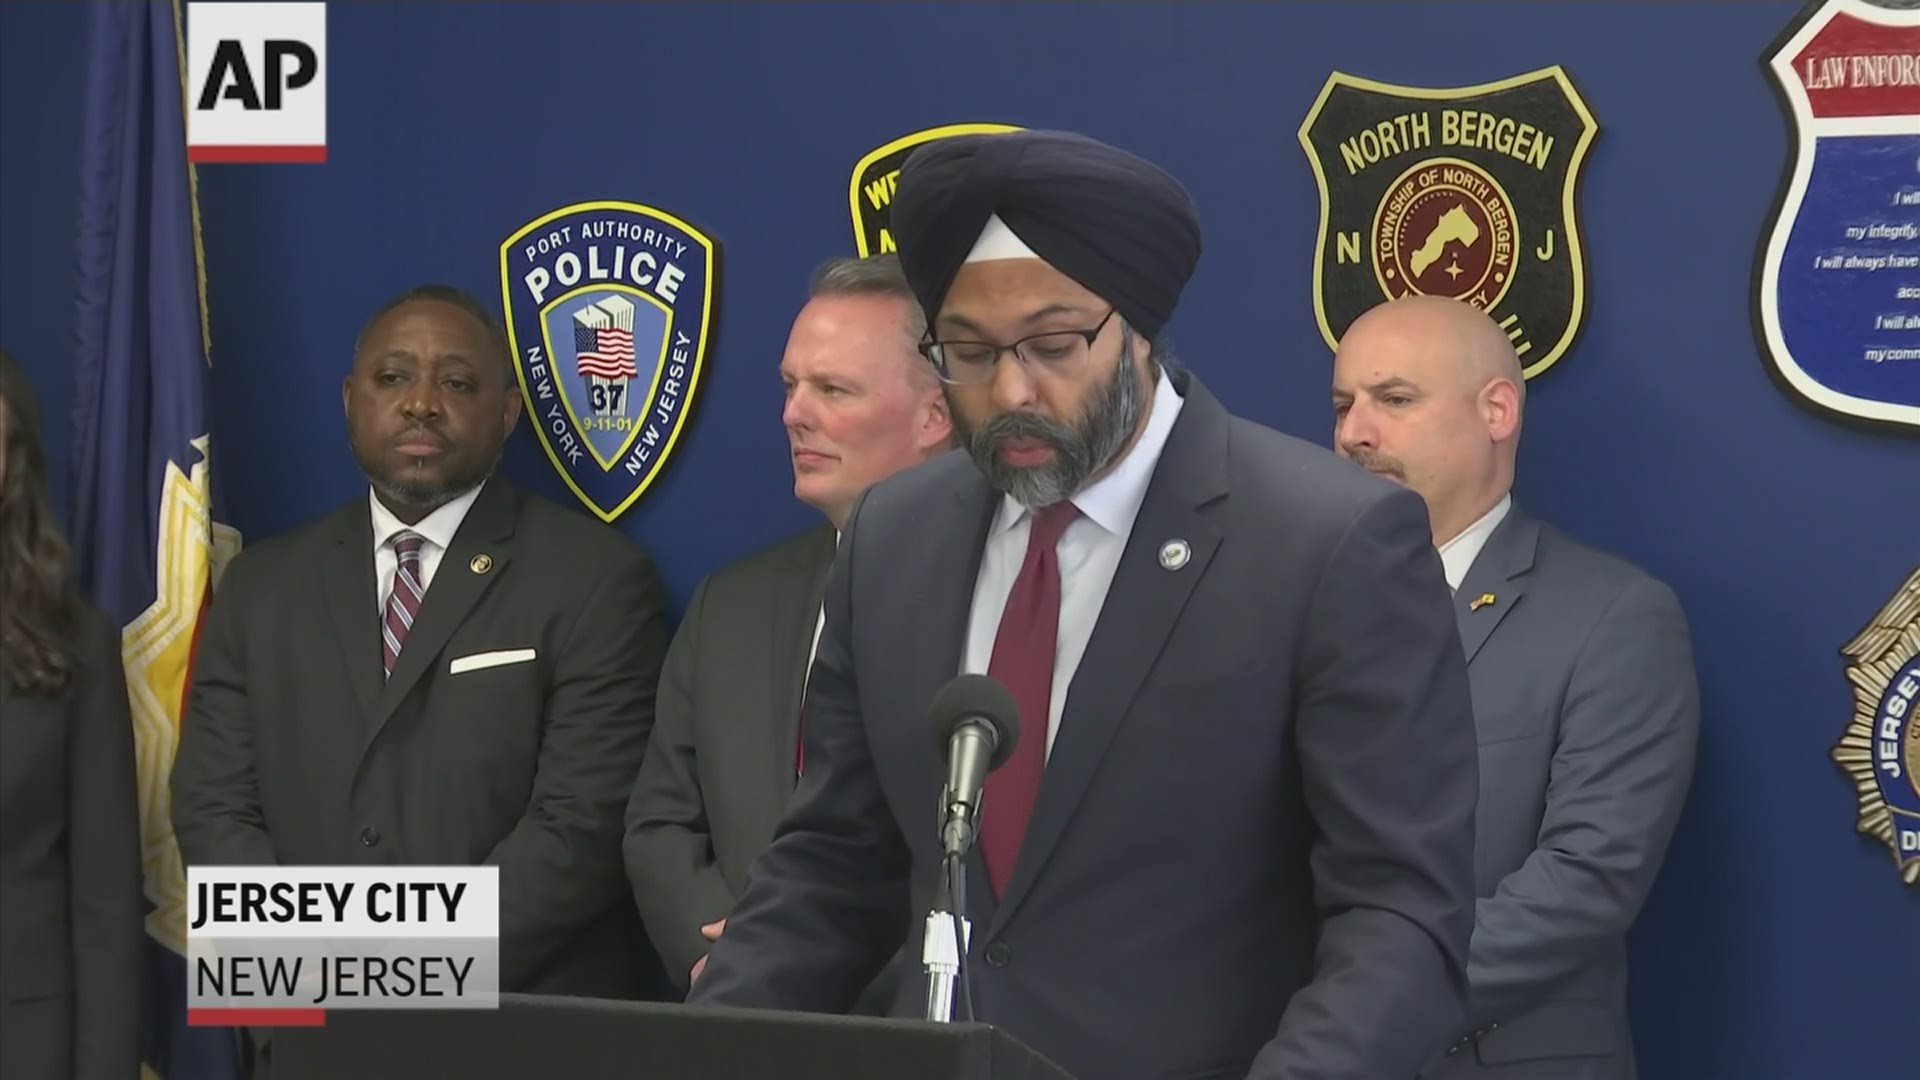 New Jersey Attorney General Gurbir Grewal also said Thursday that the case is being investigated as domestic terrorism.